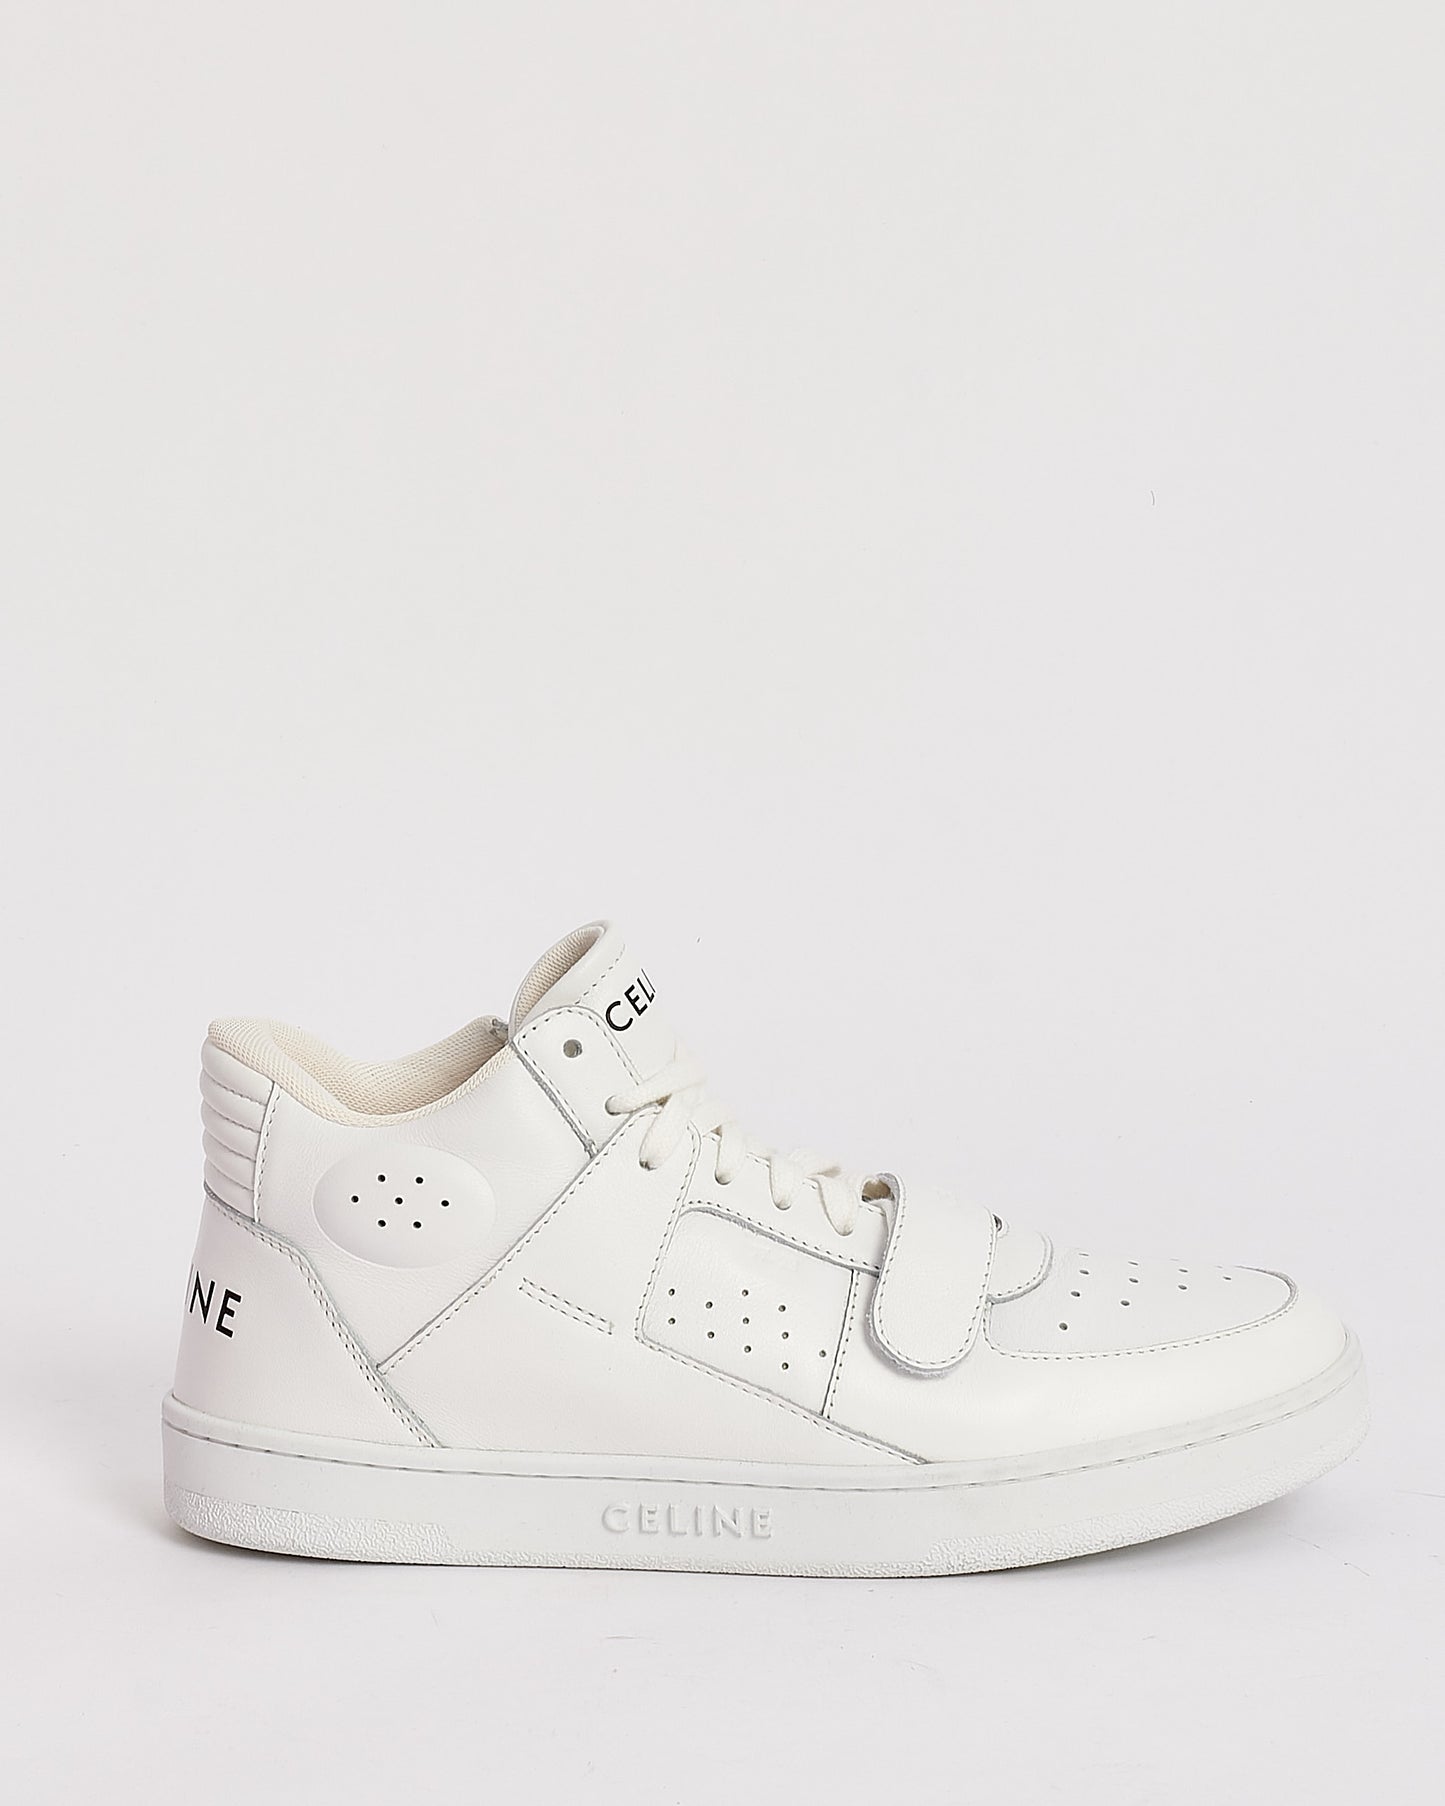 Celine White Leather CT-02 High Top Sneakers - 40